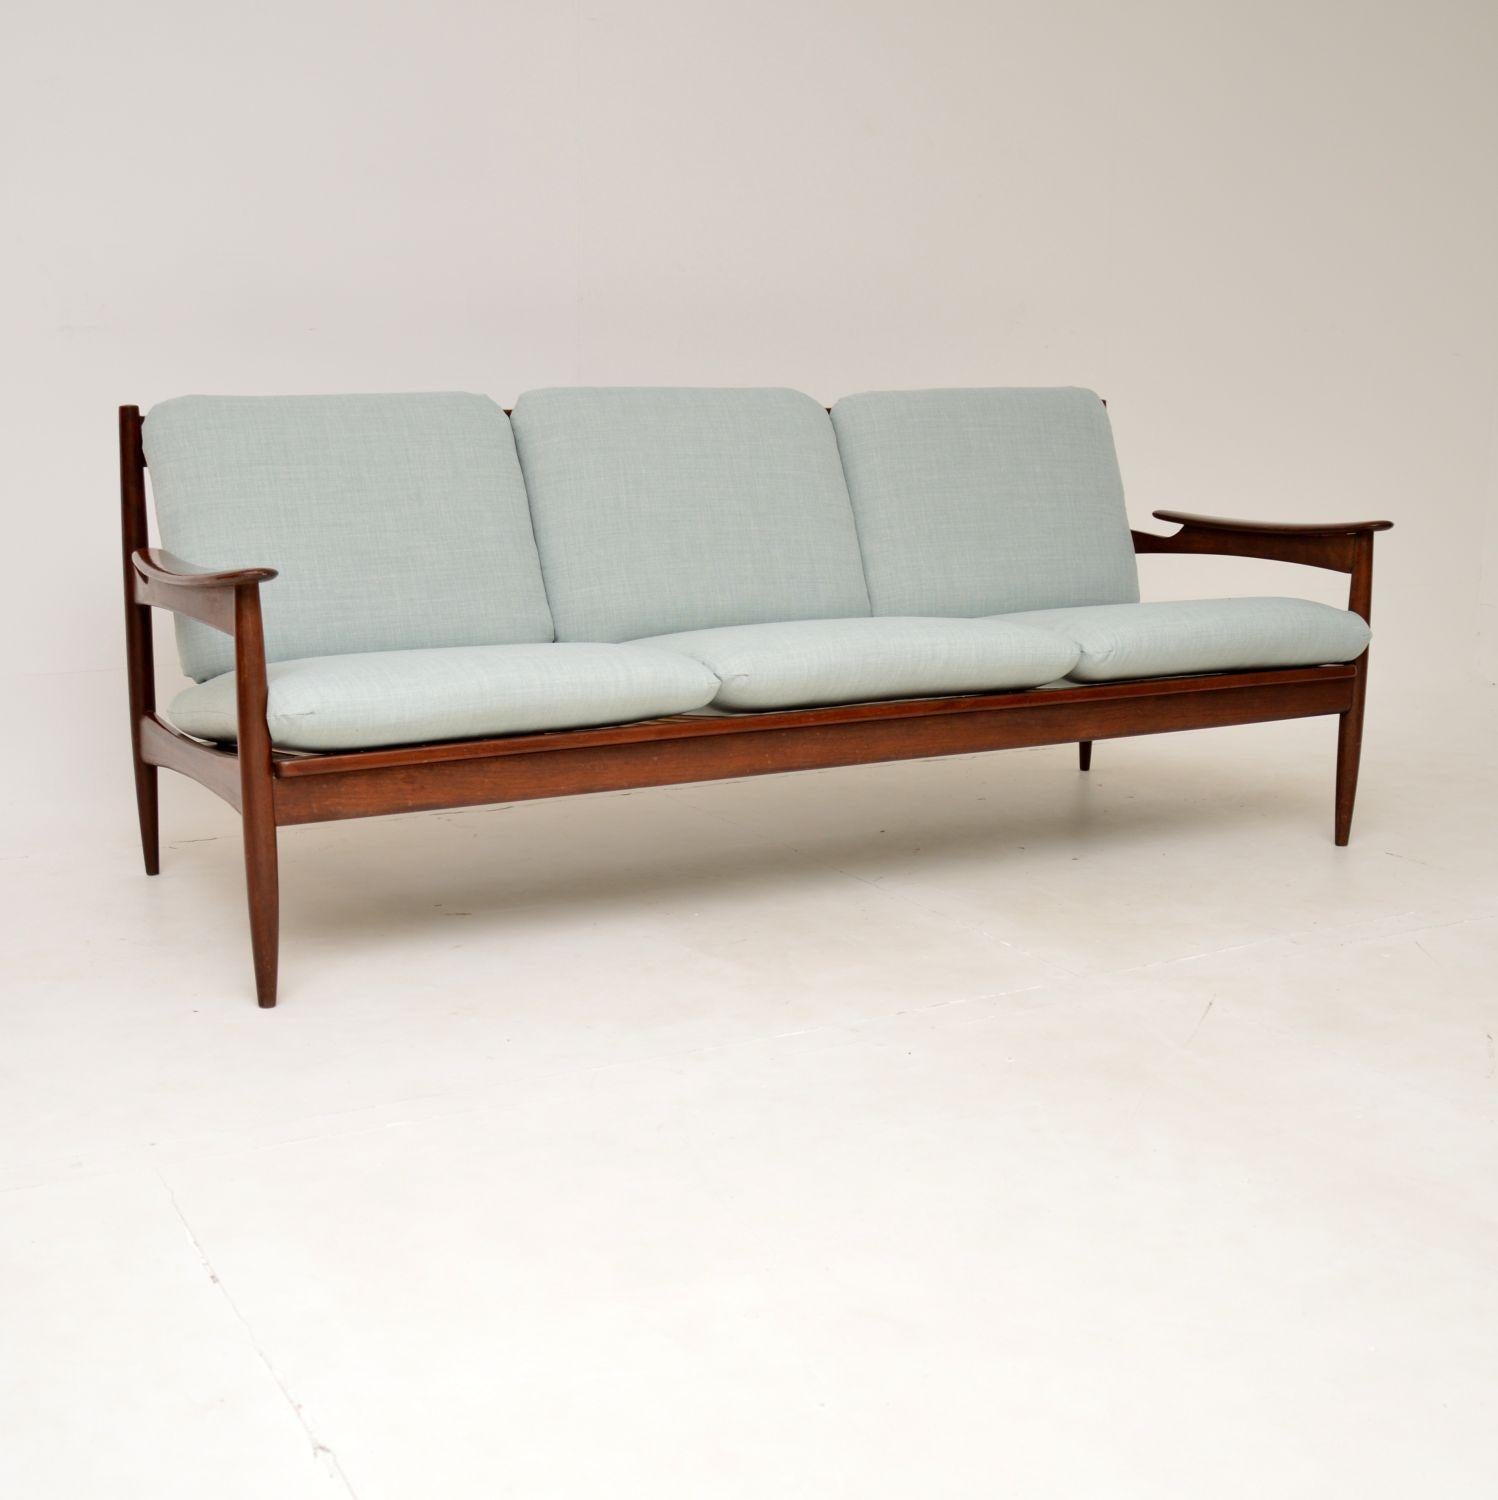 A very stylish and comfortable vintage Danish sofa. This was recently imported from Denmark, it dates from the 1960’s.

The quality is amazing and this is beautifully designed. With a very well constructed open frame, it has a sleek and very elegant